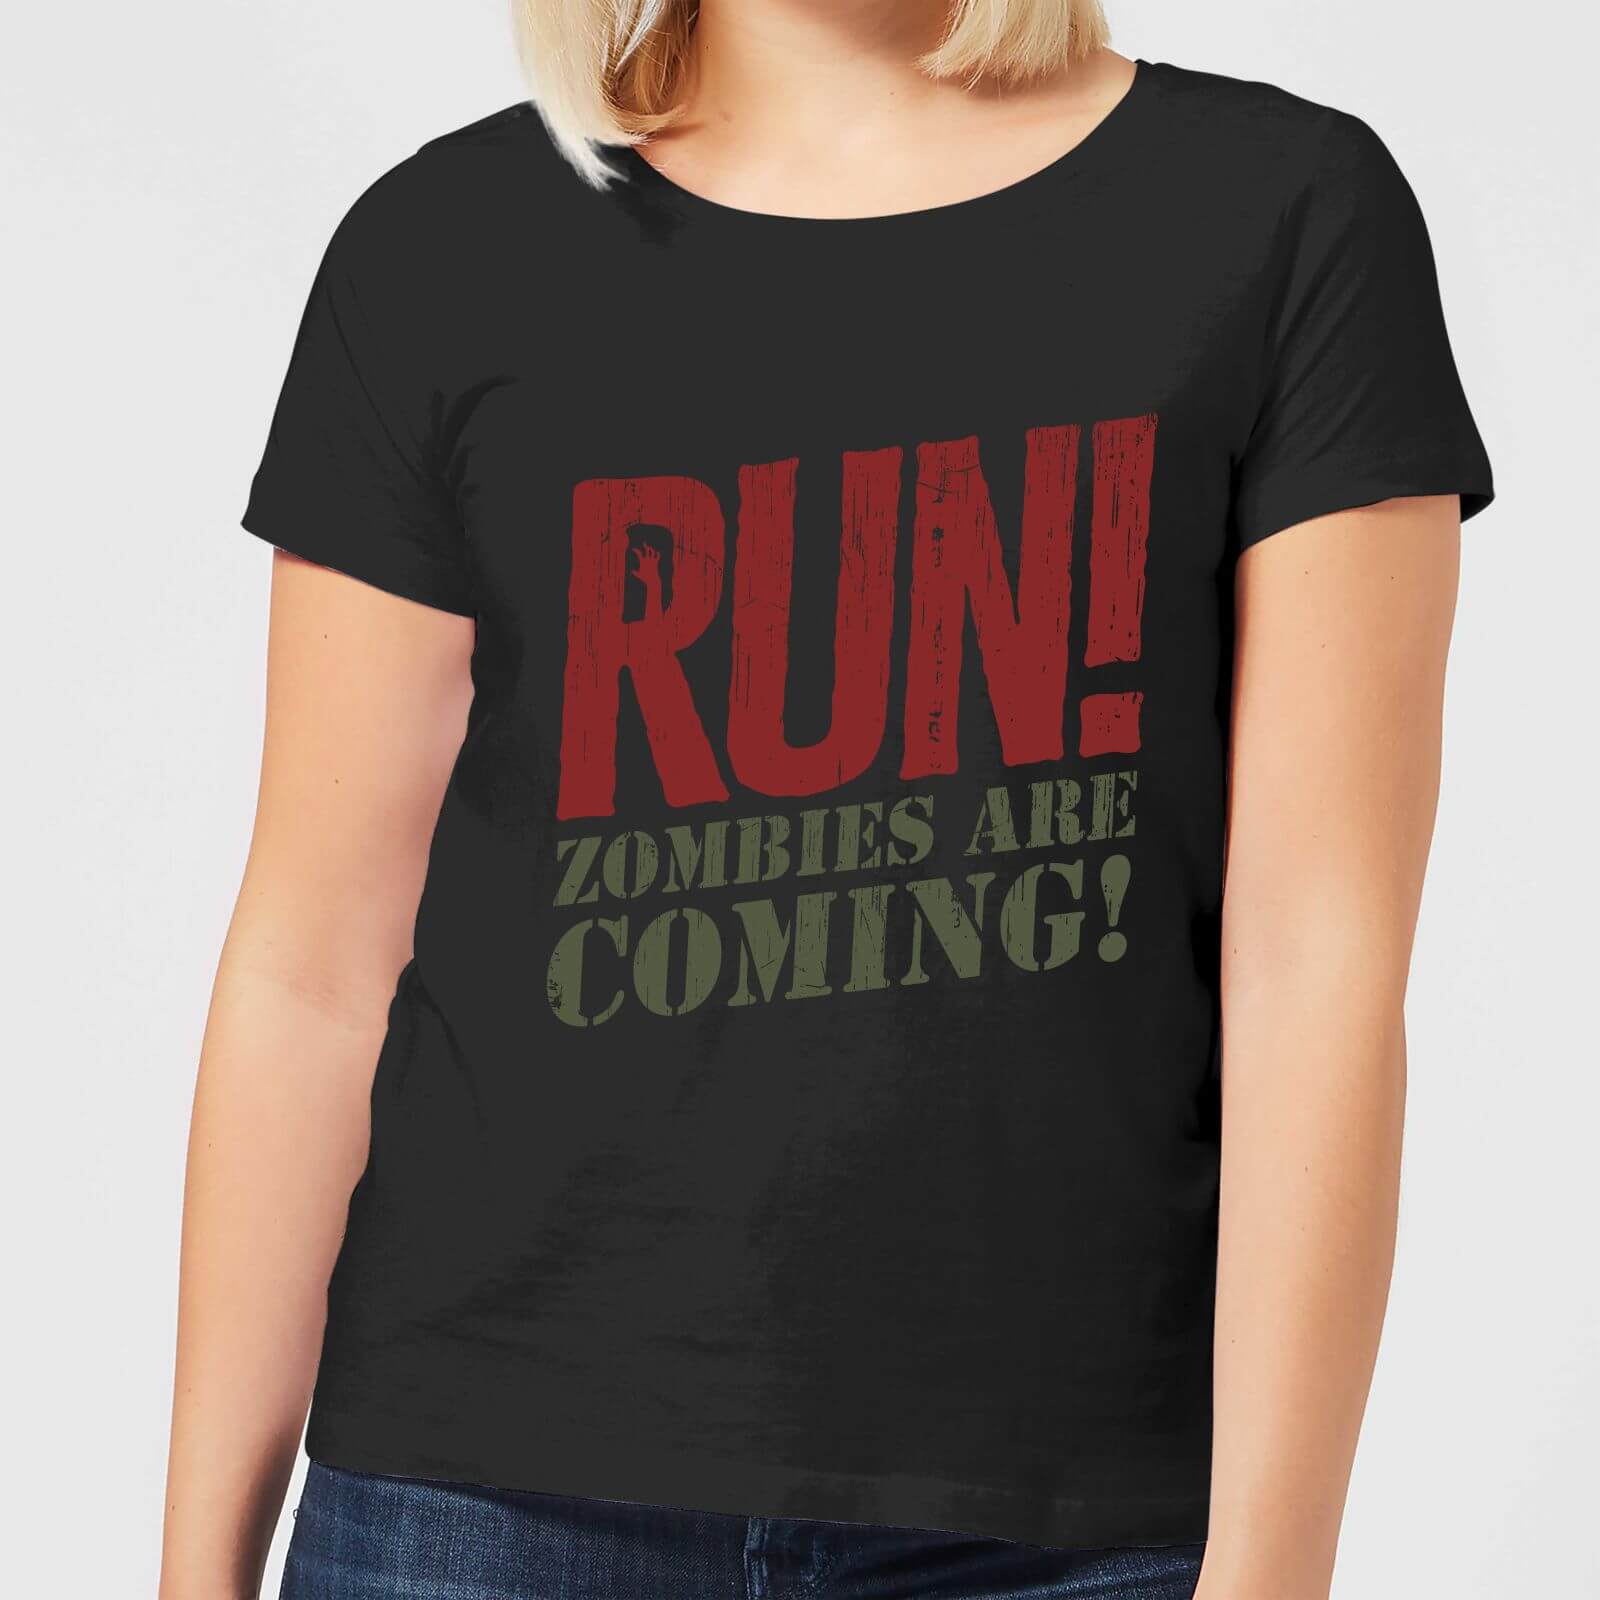 By IWOOT RUN! Zombies Are Coming! Women's T-Shirt - Black - 5XL - Black